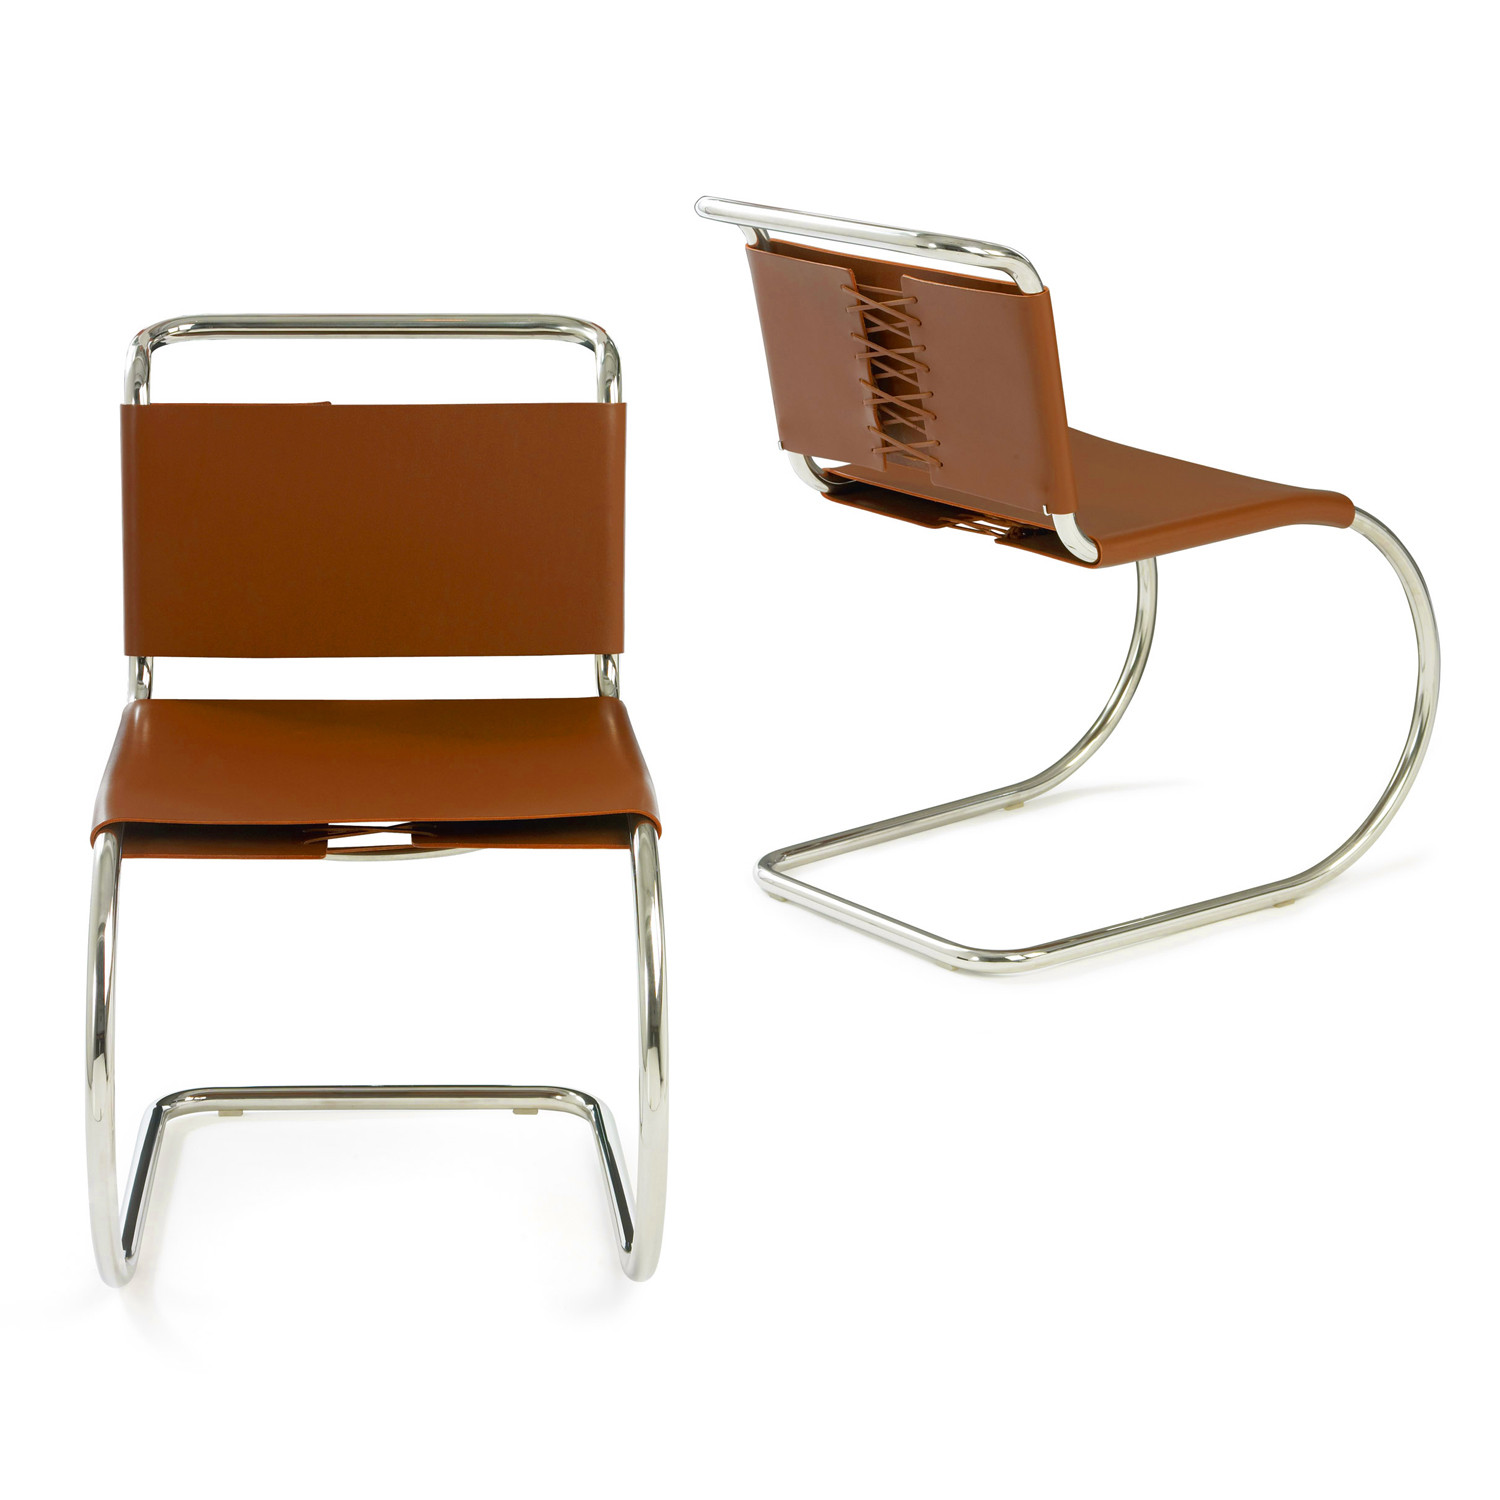 MR Chair by Ludwig Mies van der Rohe